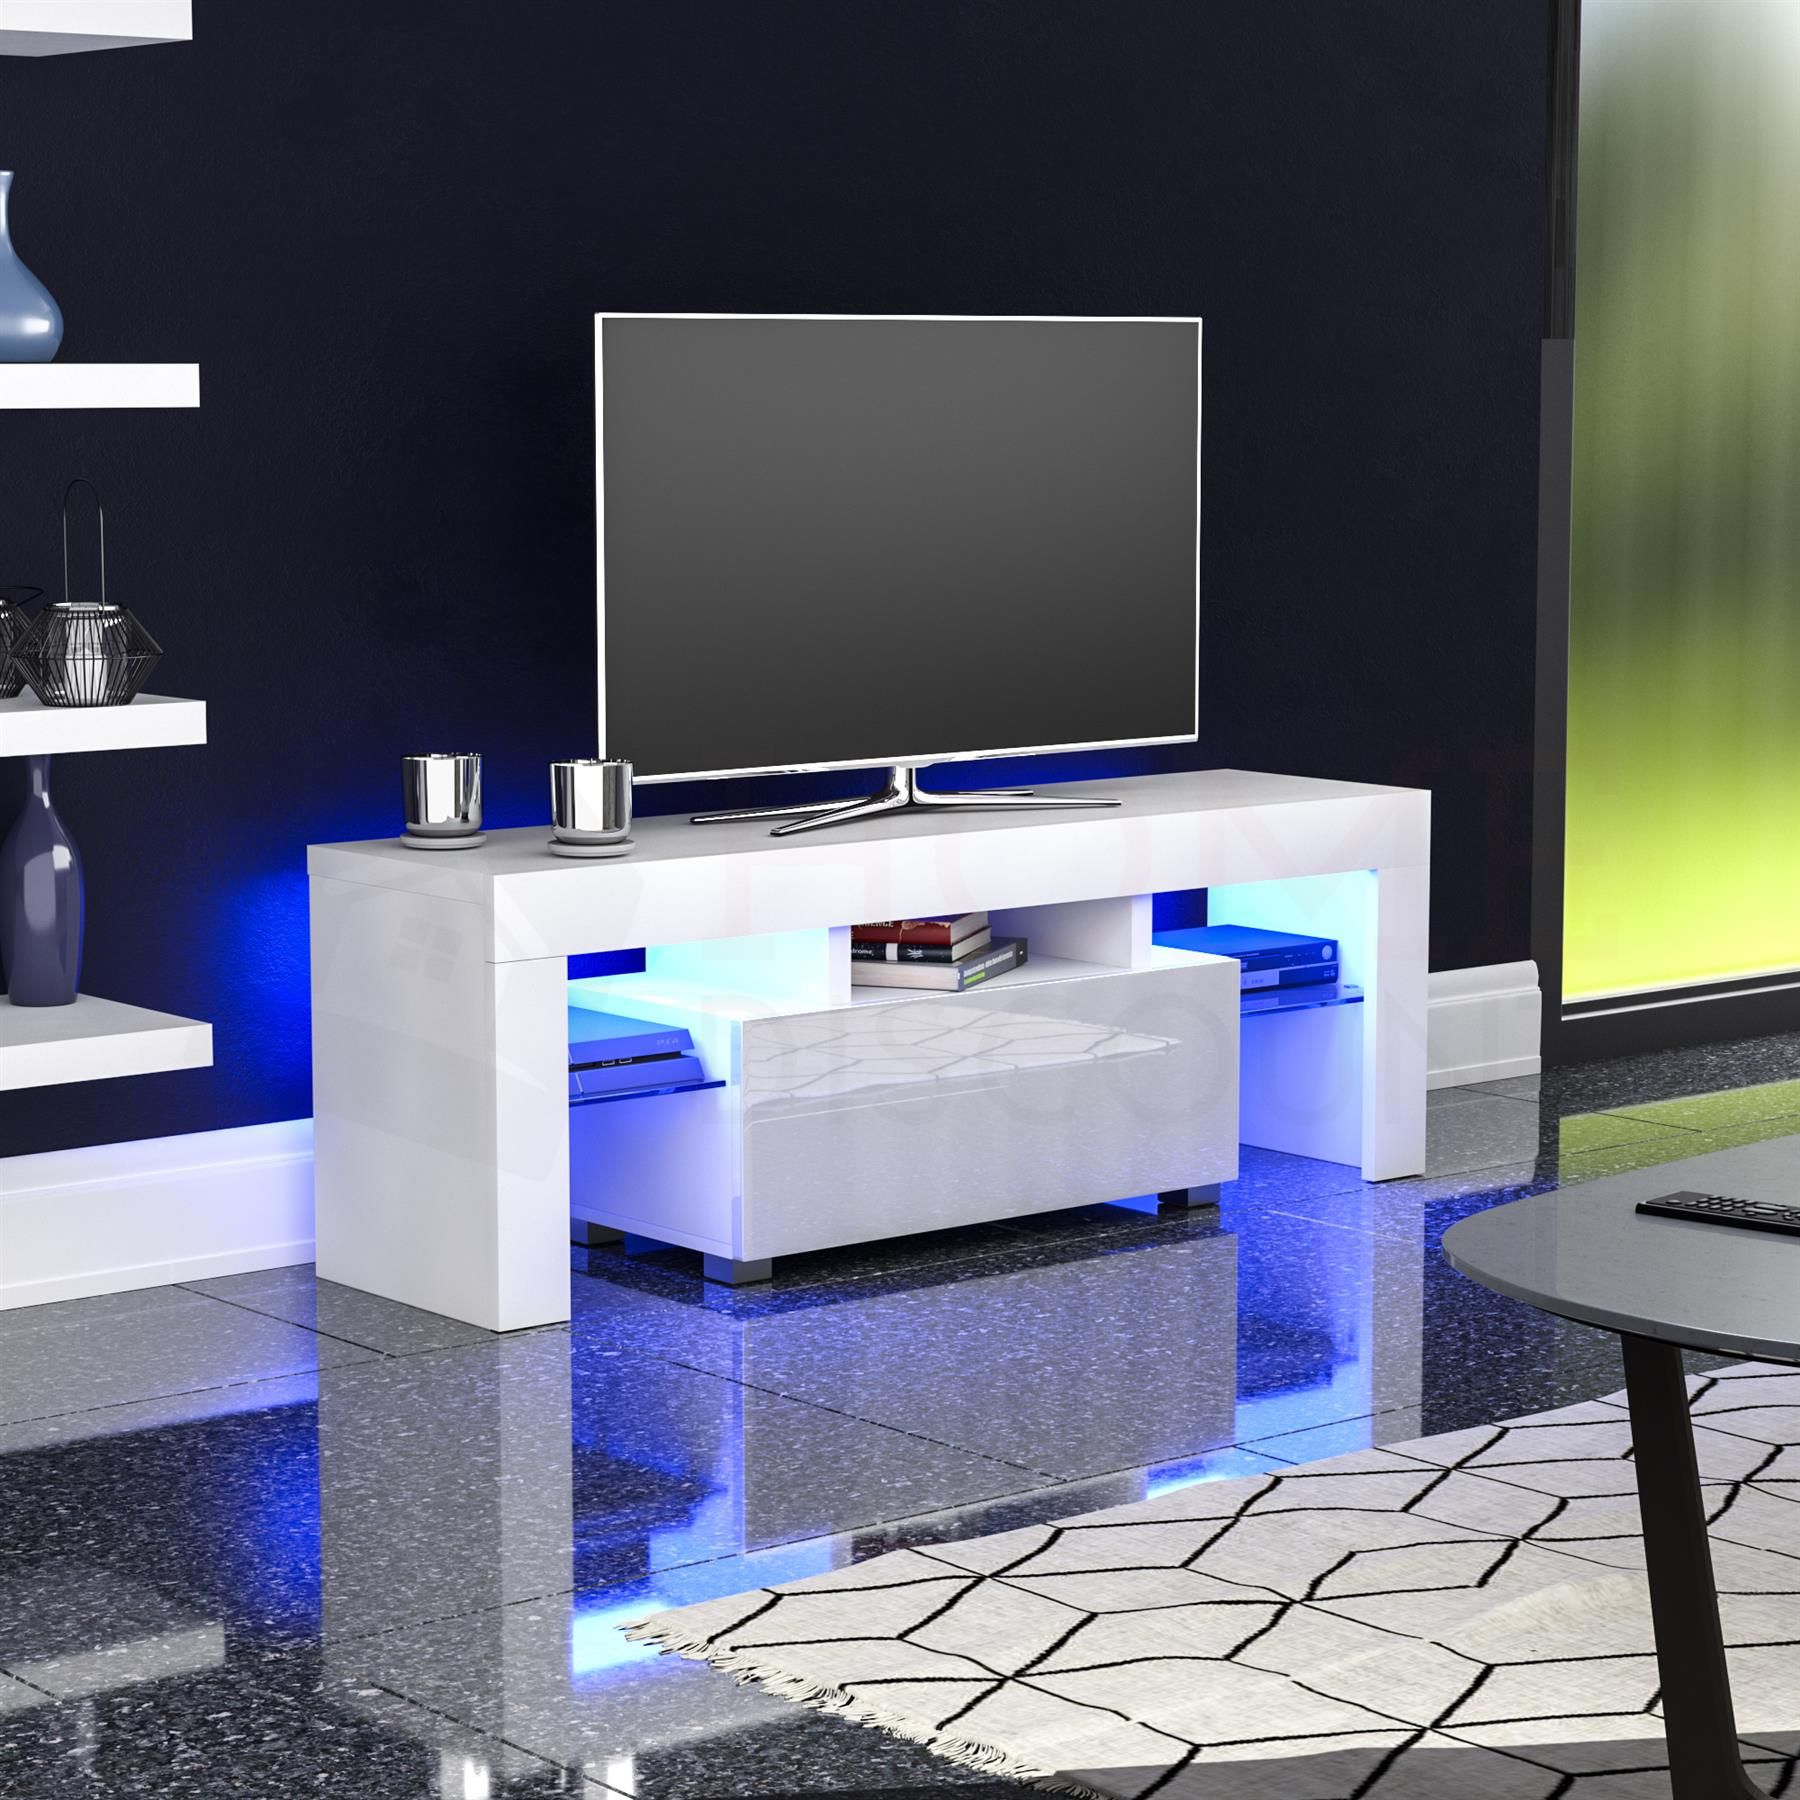 Luna Led Tv Stand Cabinet Unit 1 Drawer Modern Inside Zimtown Modern Tv Stands High Gloss Media Console Cabinet With Led Shelf And Drawers (View 3 of 15)